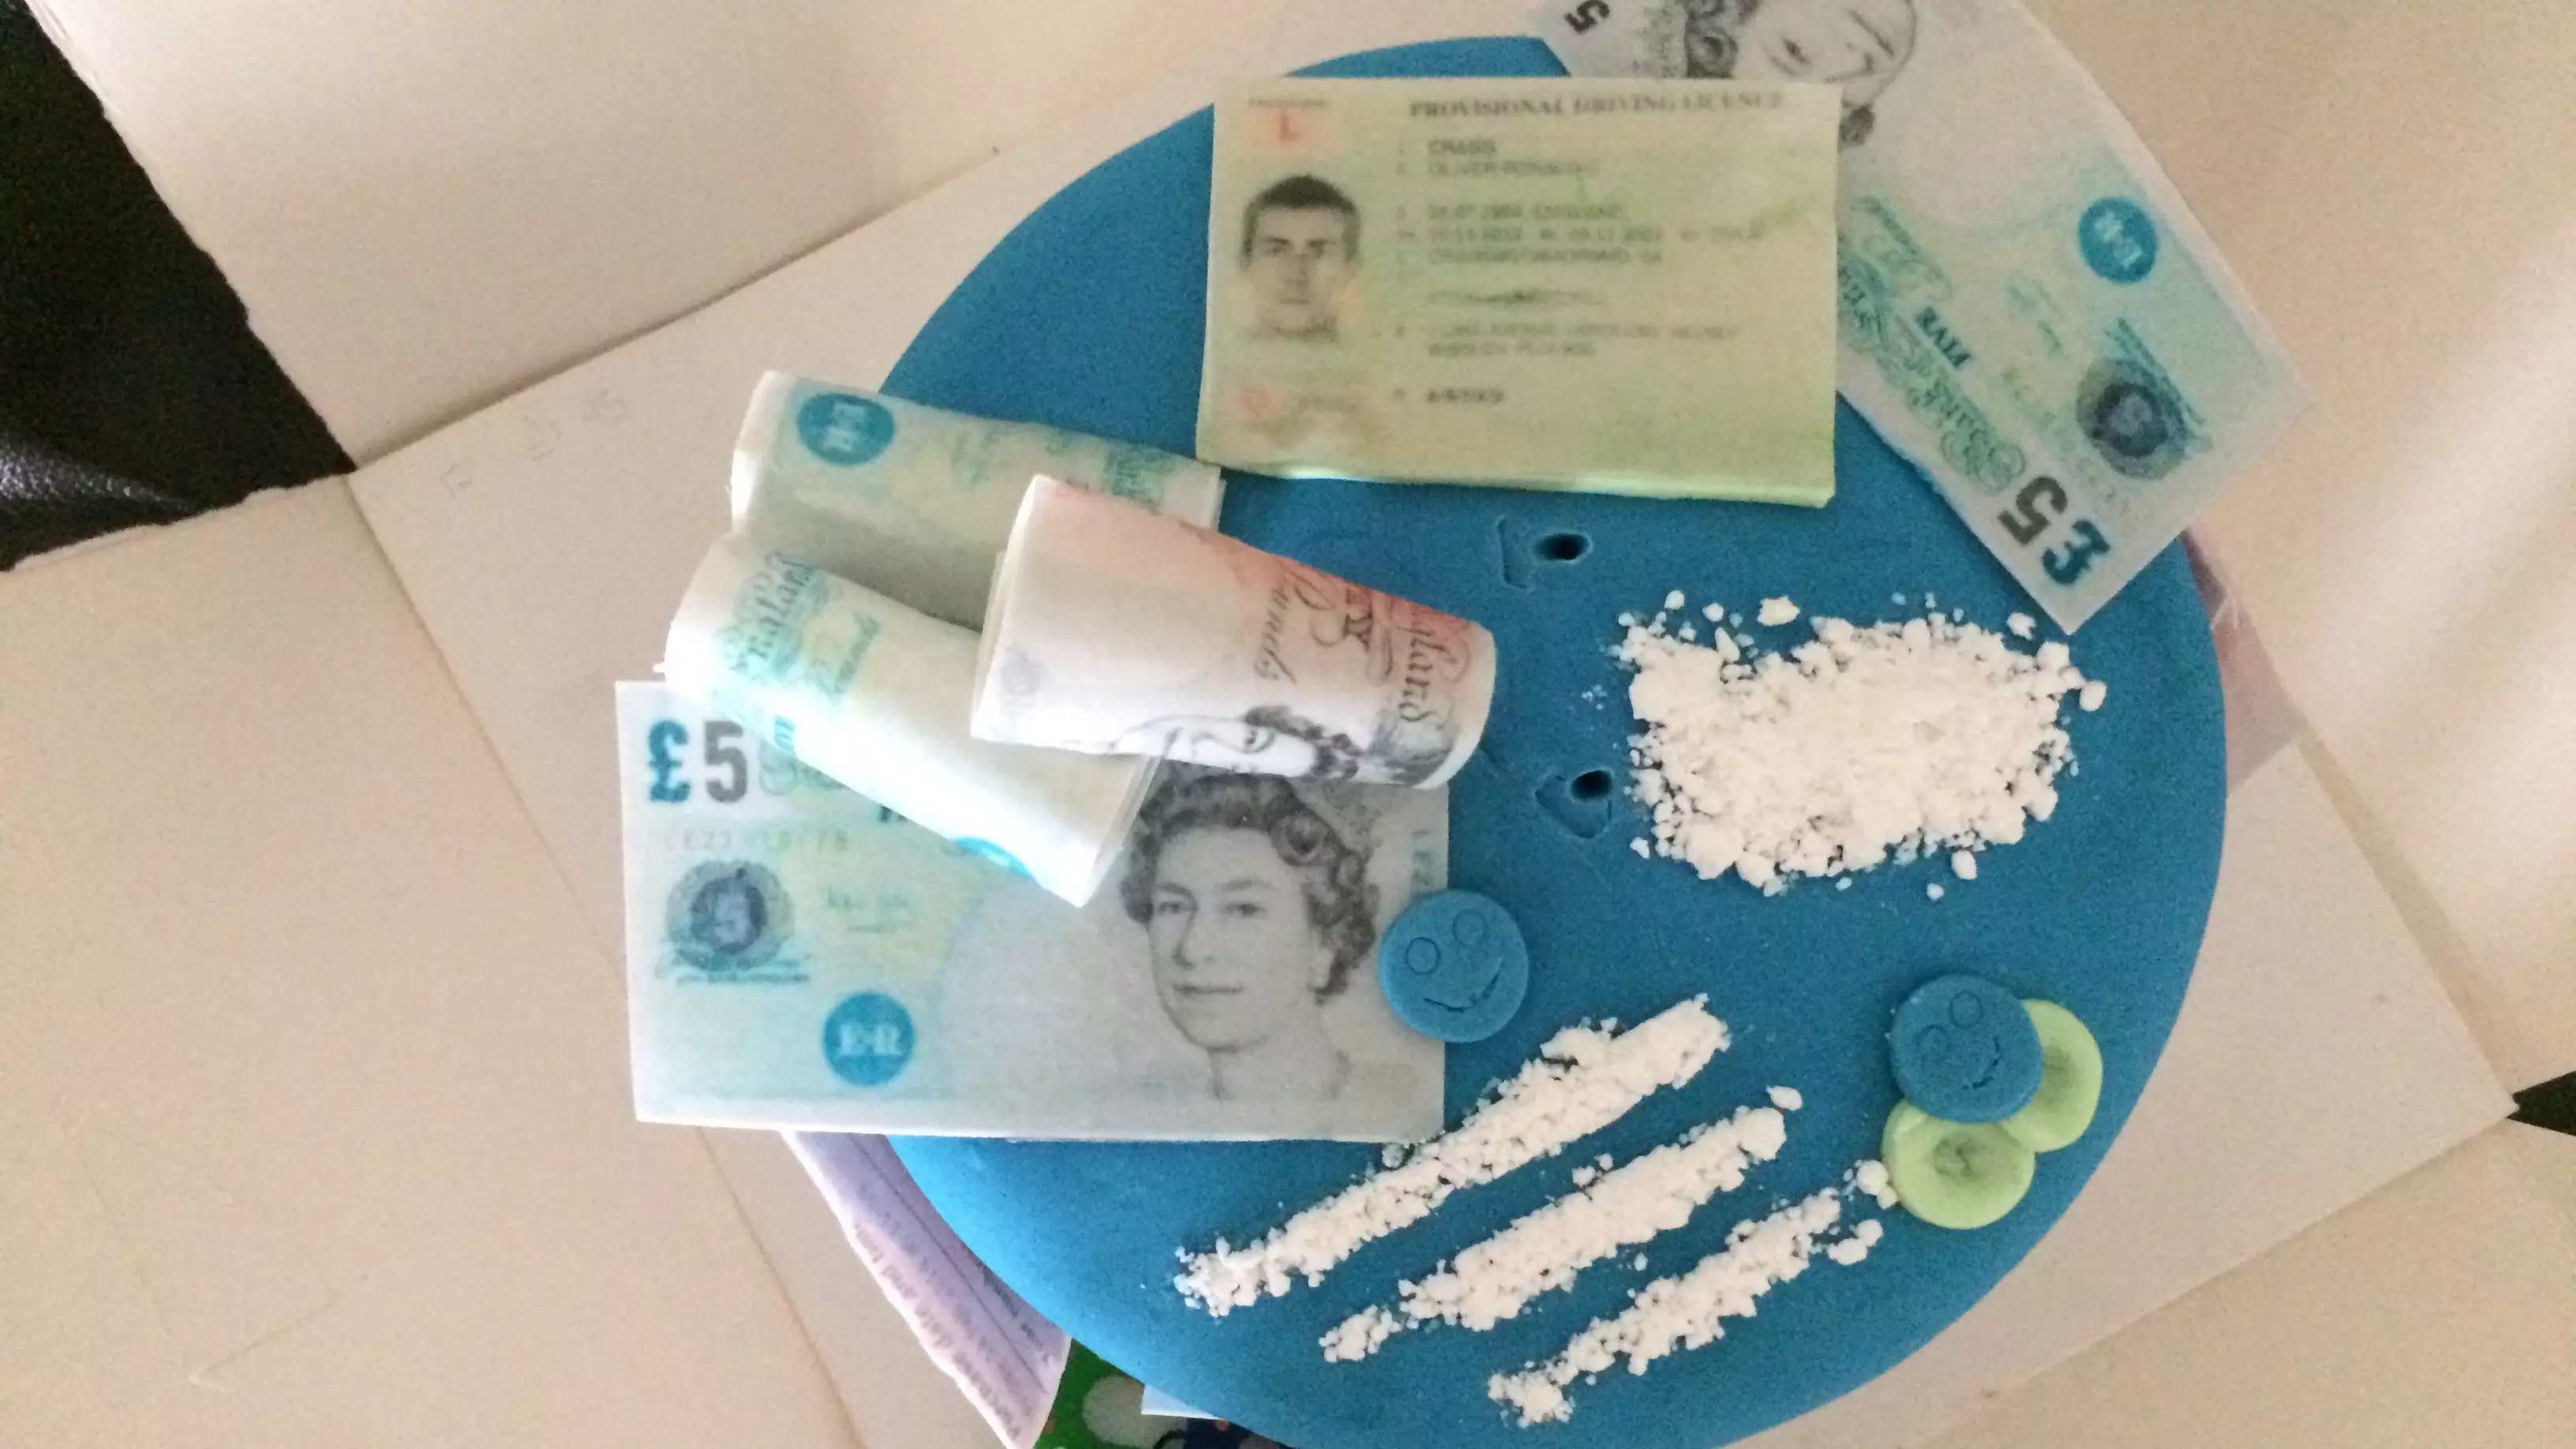 Someone Made A Cocaine And Ecstasy-Themed Birthday Cake